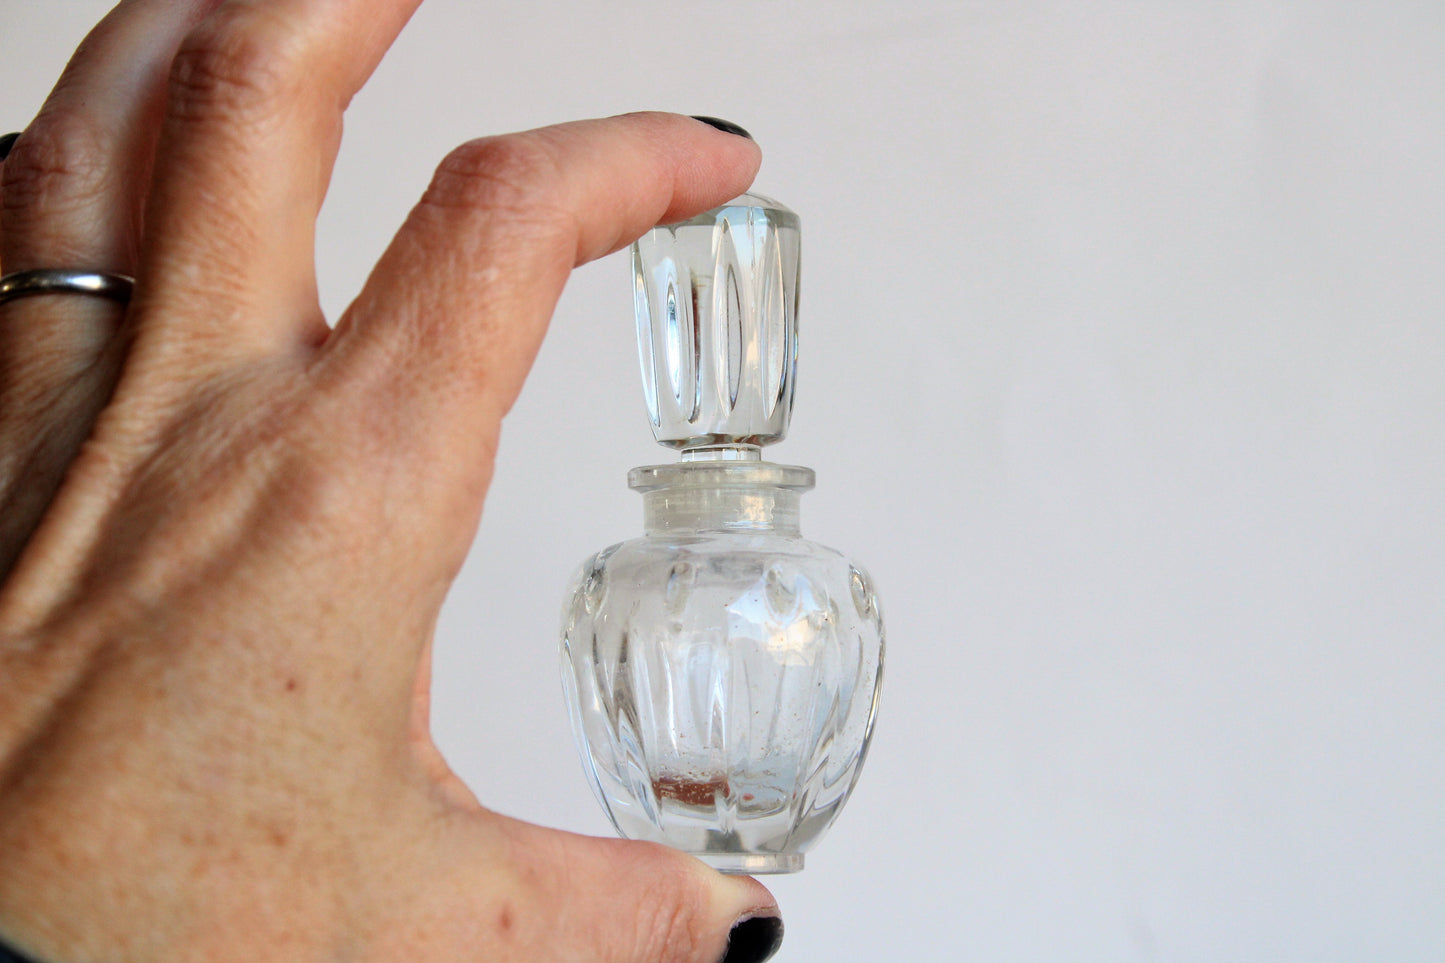 Vintage French Glass Perfume Bottle